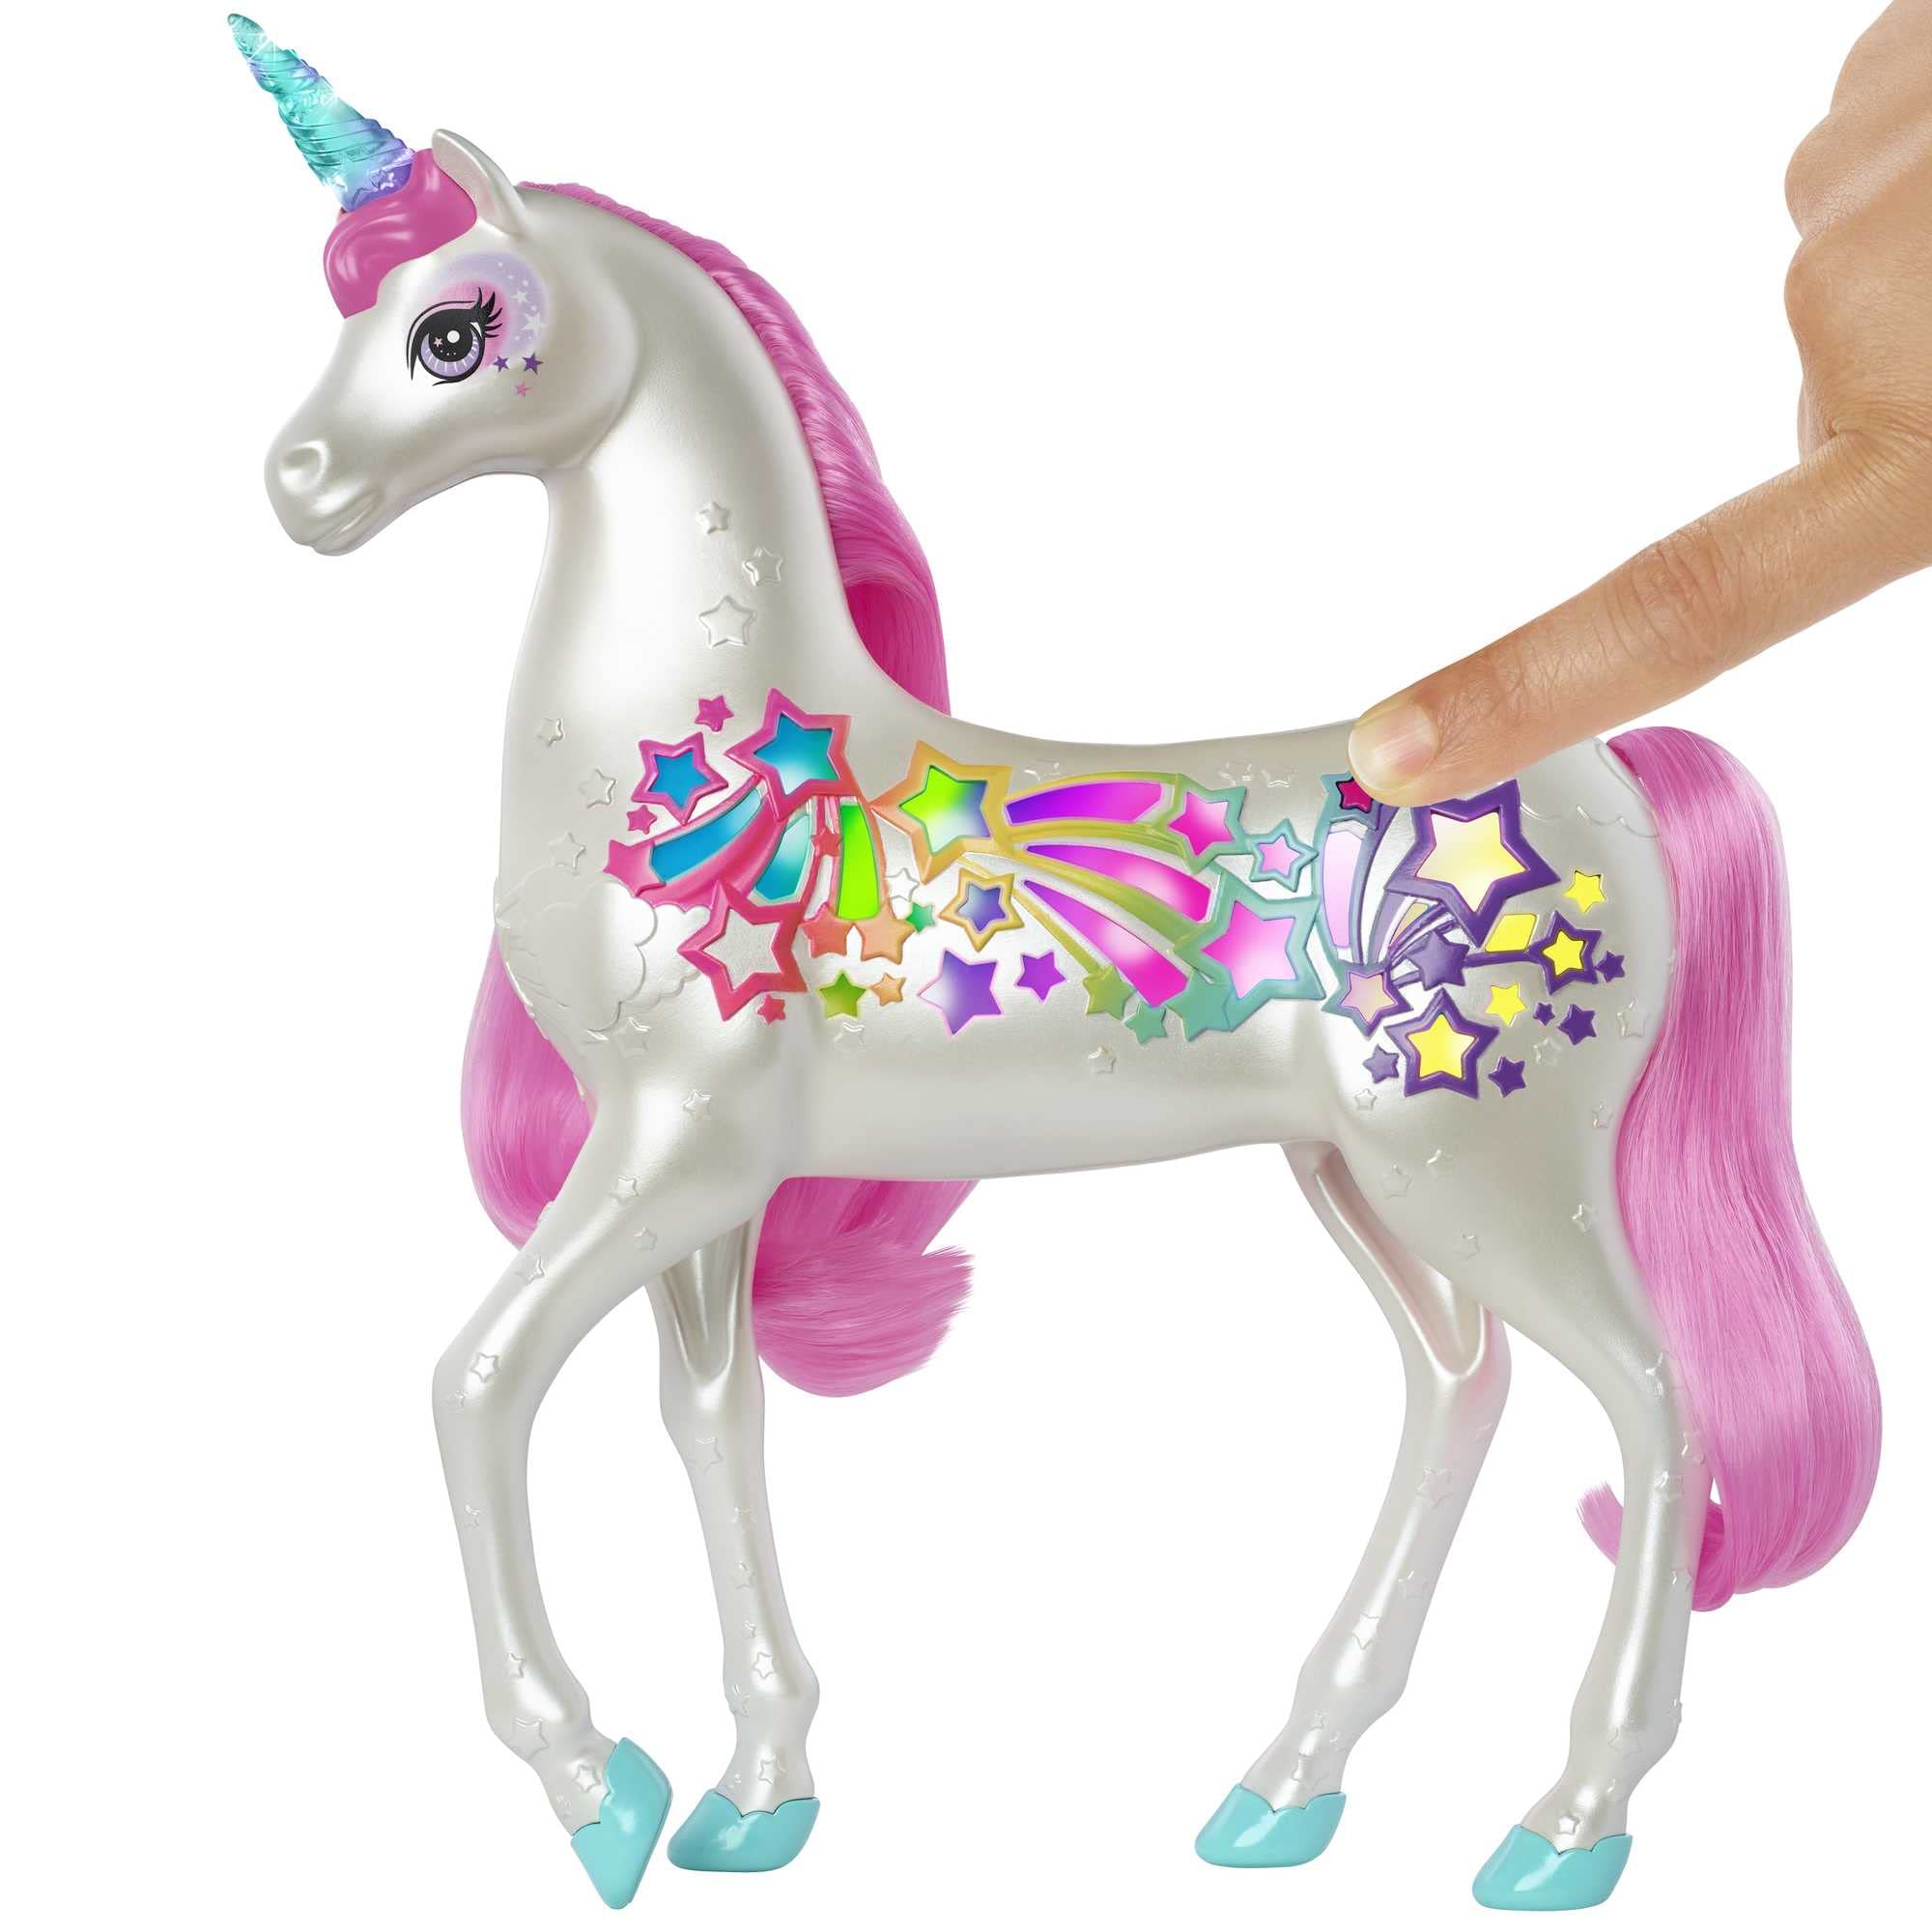 Barbie Dreamtopia Unicorn Toy, Brush 'N Sparkle Pink and White Unicorn with 4 Magical Lights and Sounds (Amazon Exclusive)